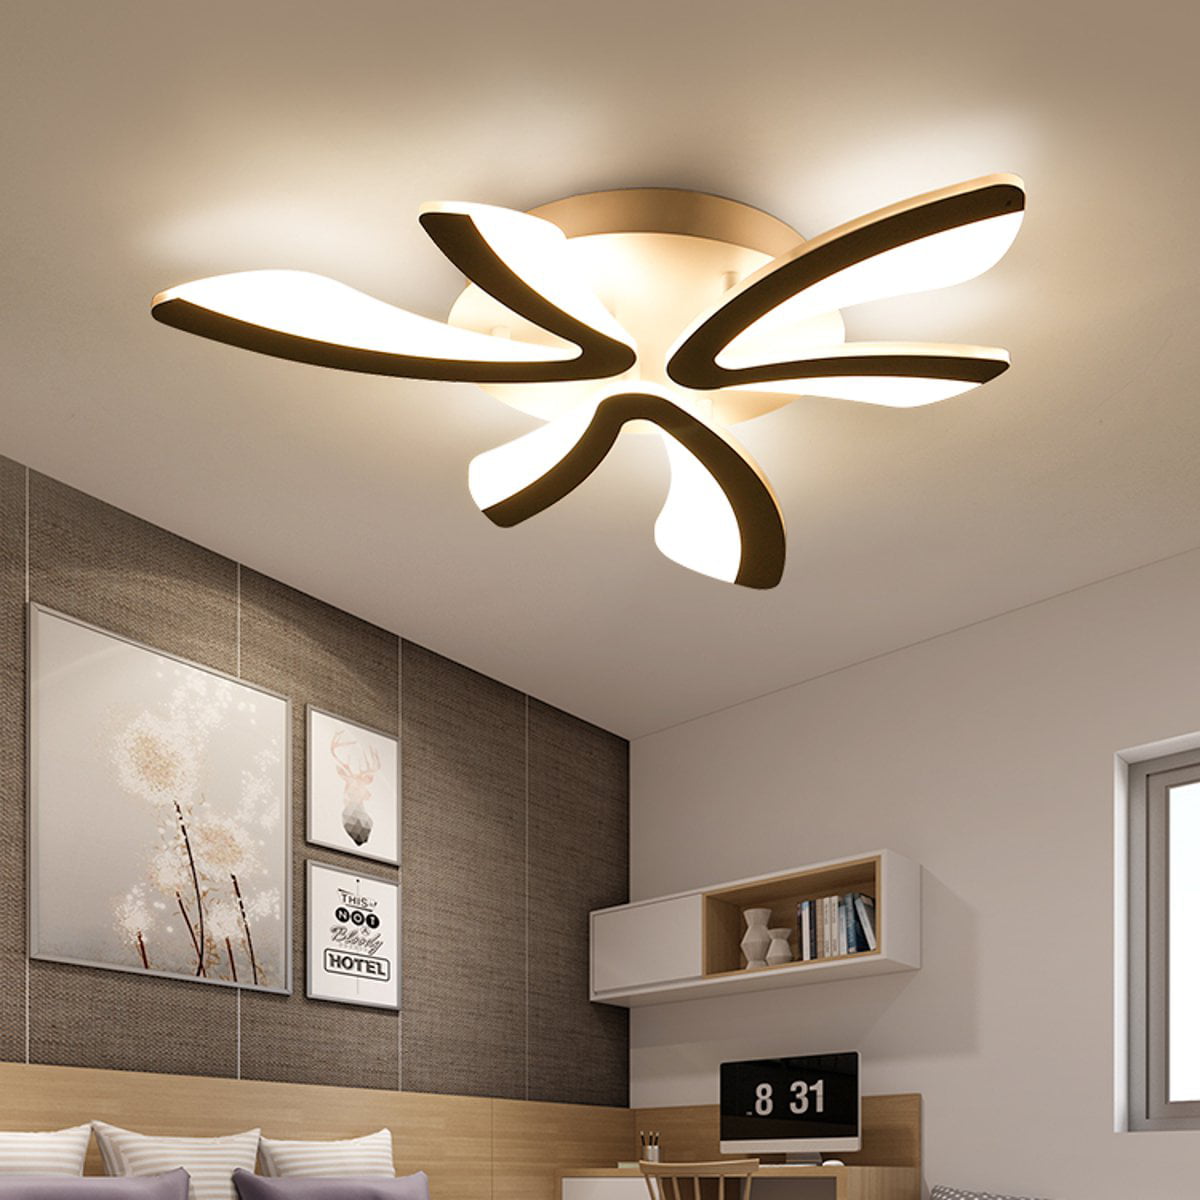 LED Ceiling Light Fixture with Remote Control,Chandelier Modern Acrylic